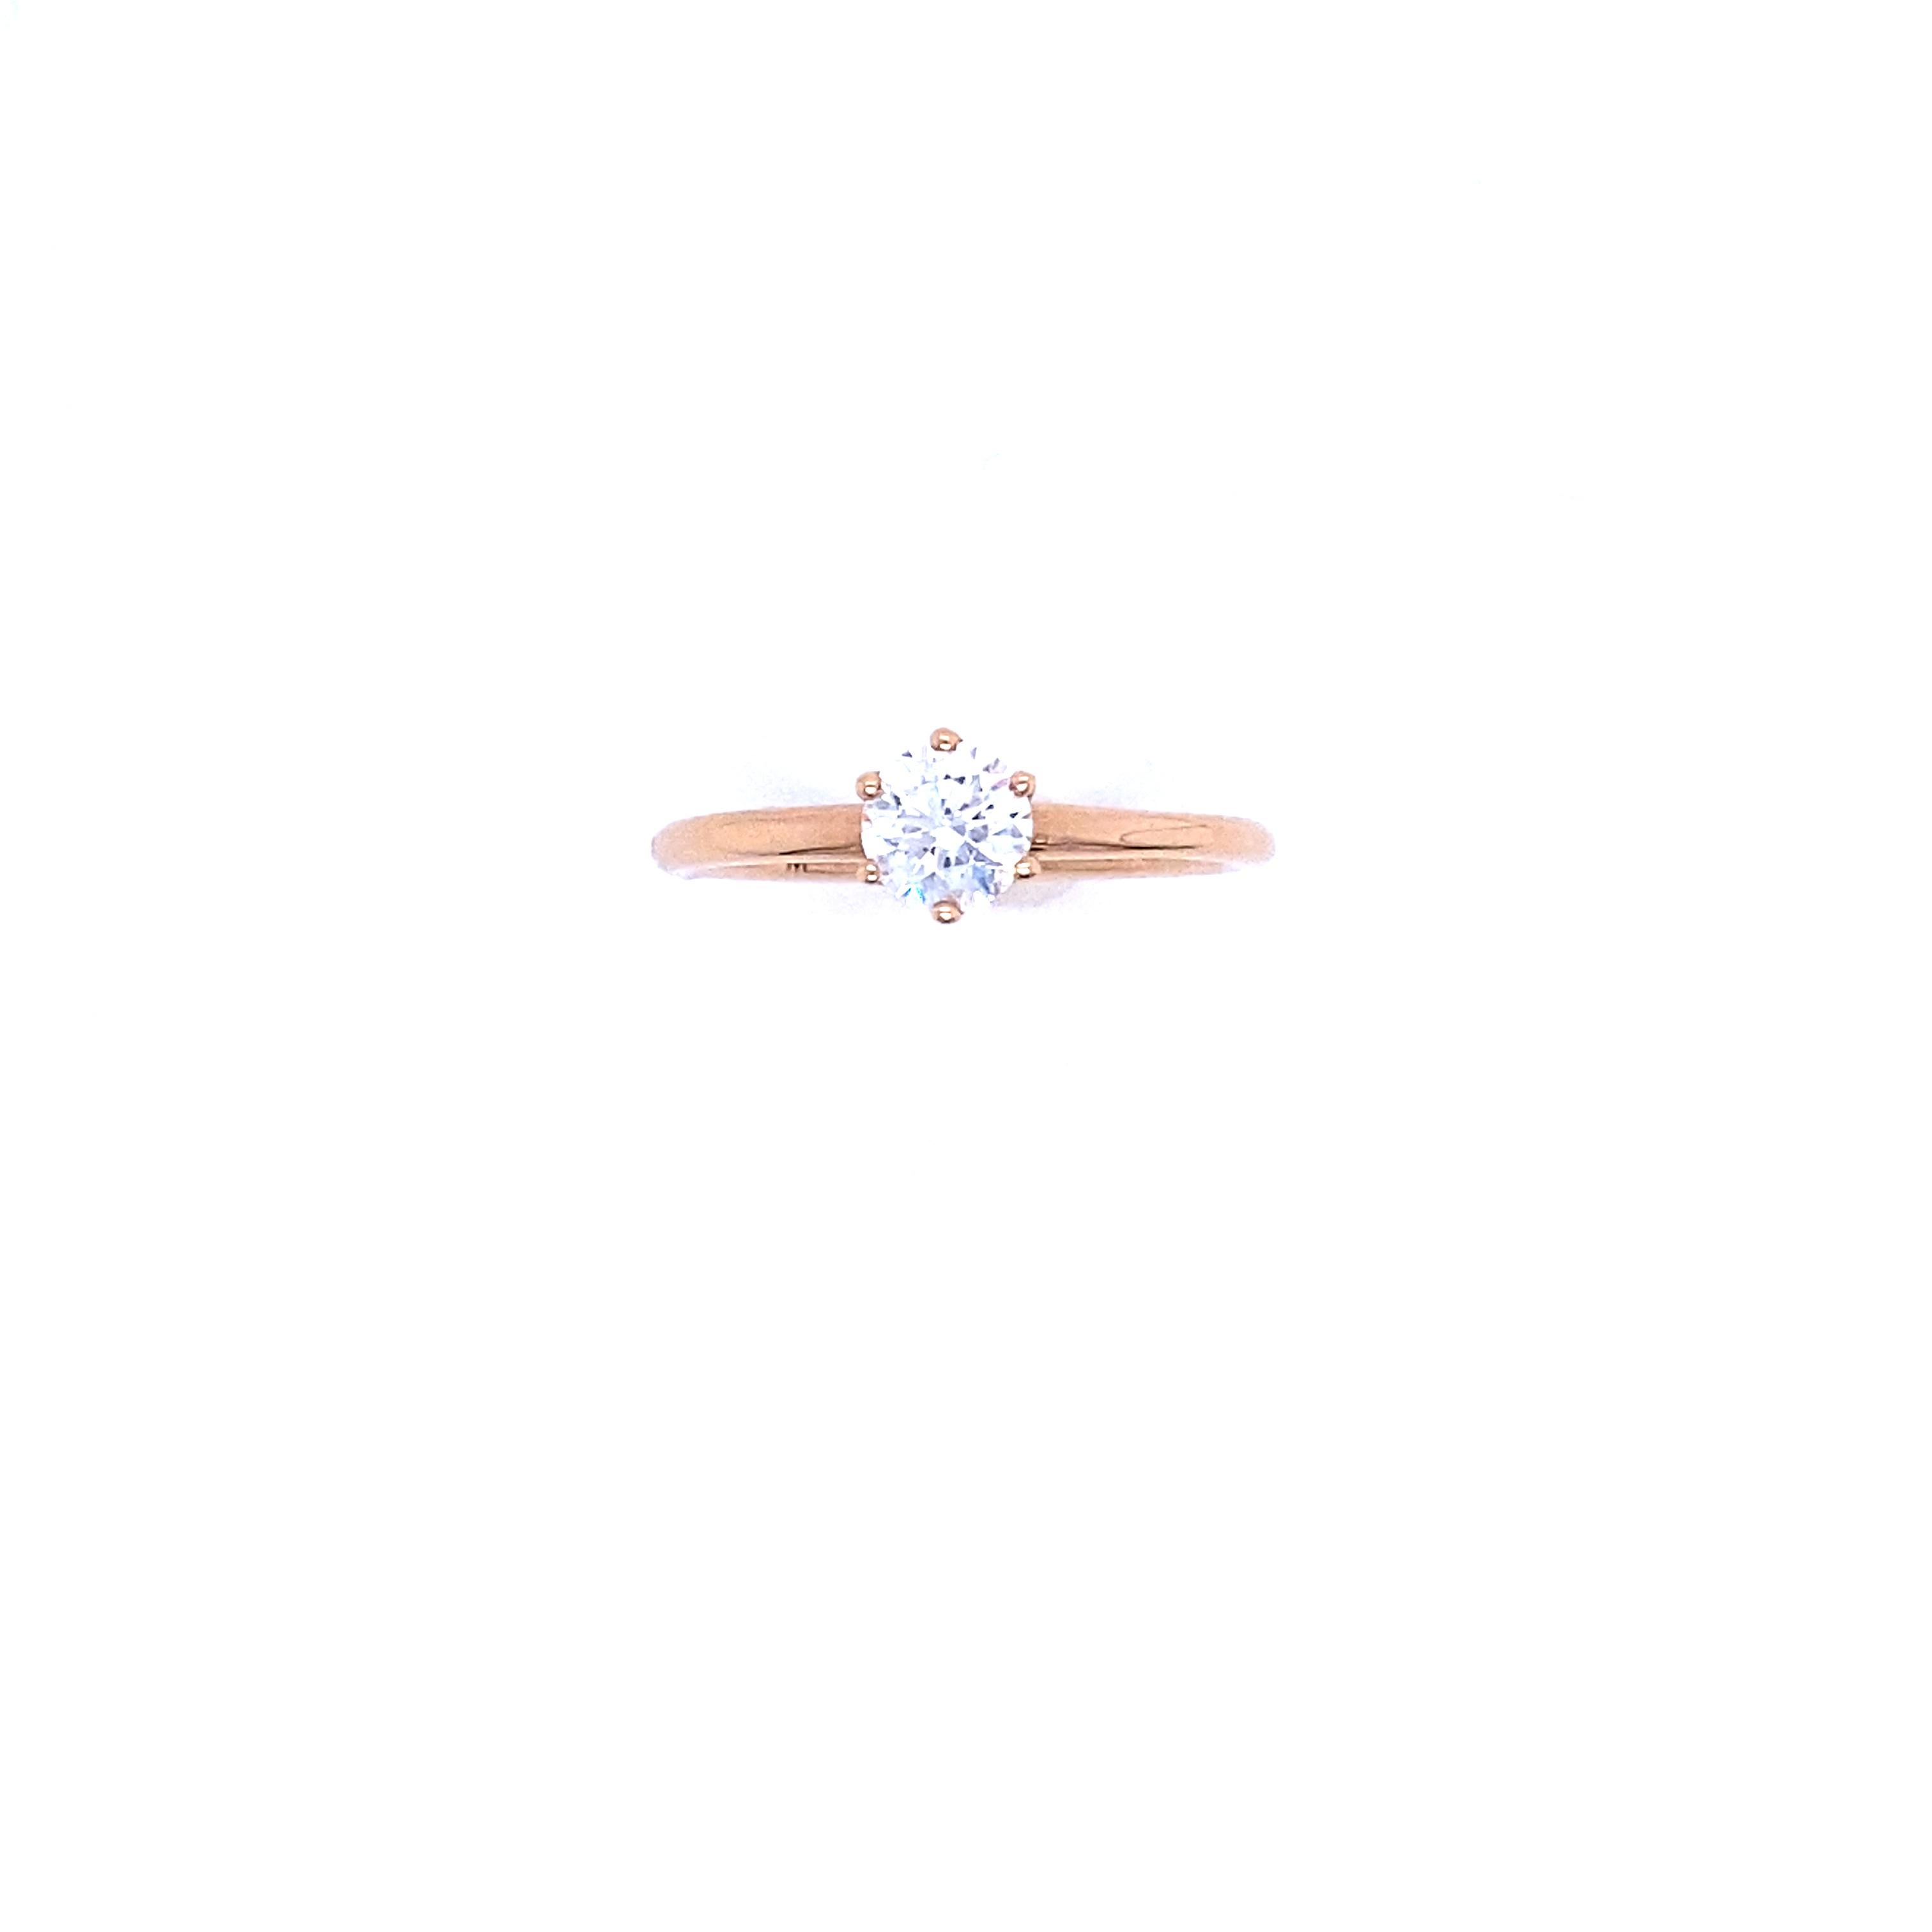 GIA Certified Rose Gold Ring with 0.50 Carat Diamond, color E.
Superb Diamond of 0.50 carat certified by GIA. The diamond has a round brilliant cut. Diamond's degrees of cut, symmetry and polish indicate the quality of craftsmanship that went into